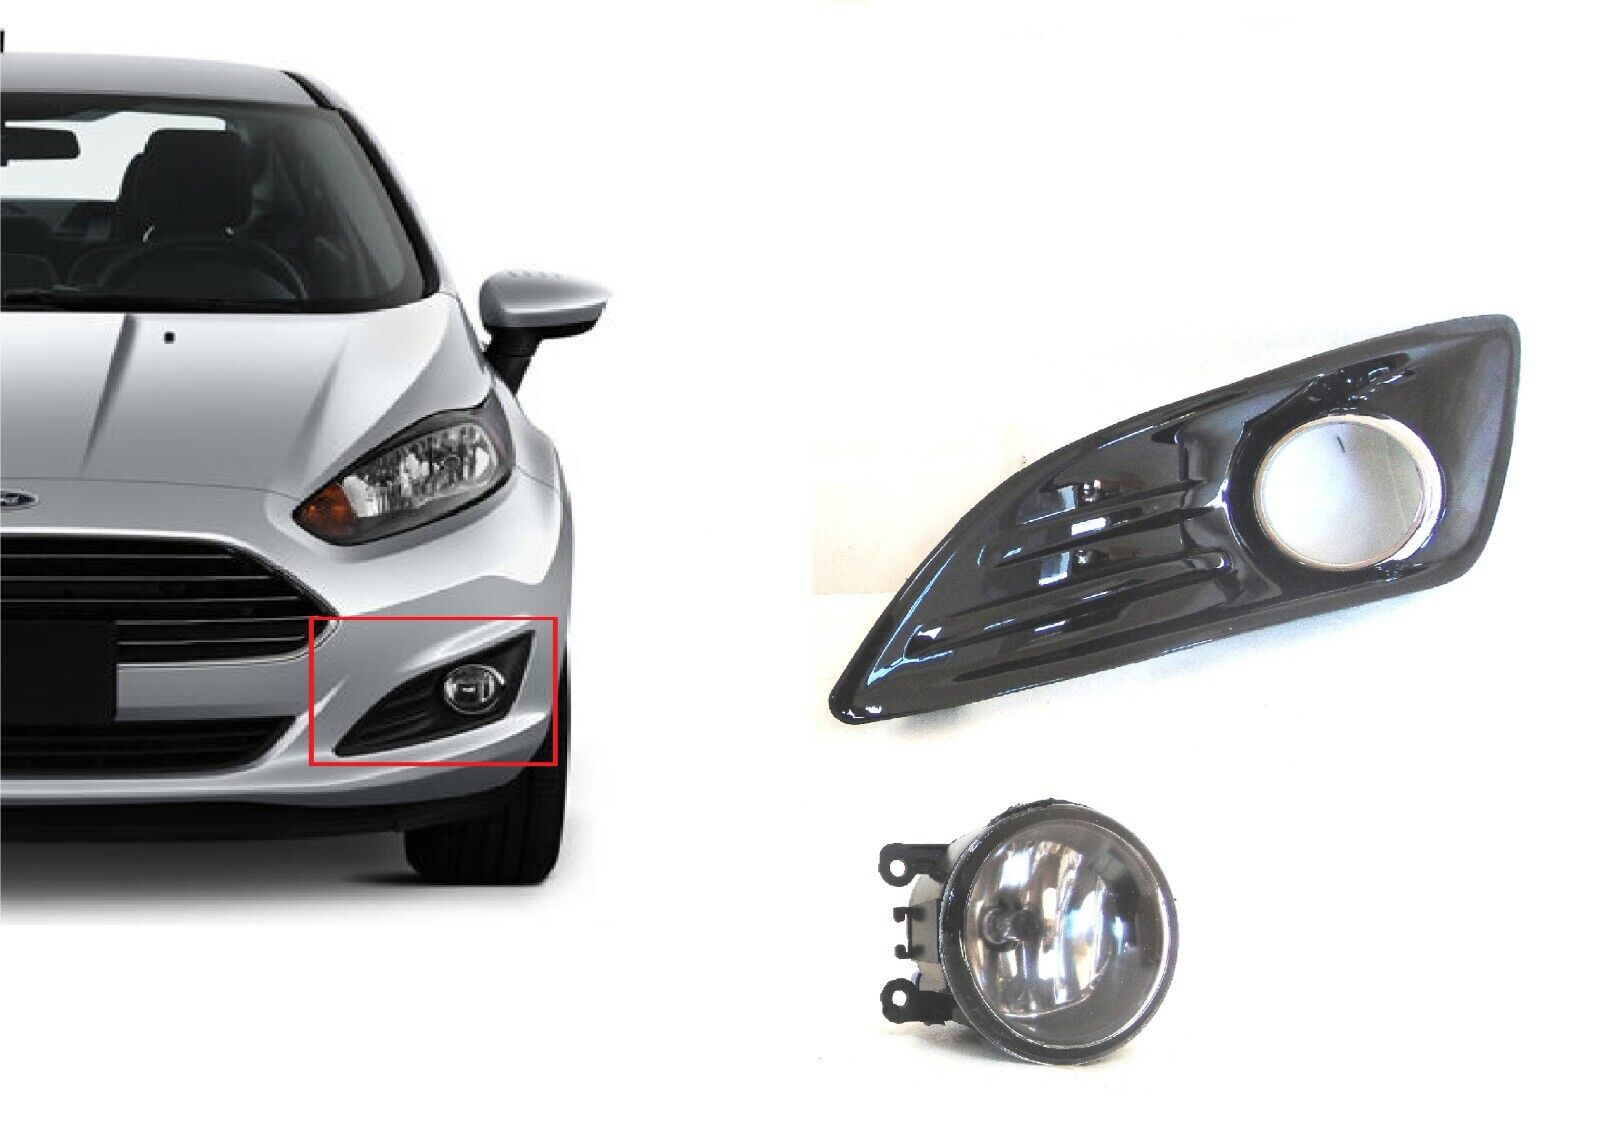  beler Front Left + Right Bumper Fog Light Lamp Cover Grille  Grill Assembly For Ford Fiesta 2013-2014 : Automotive